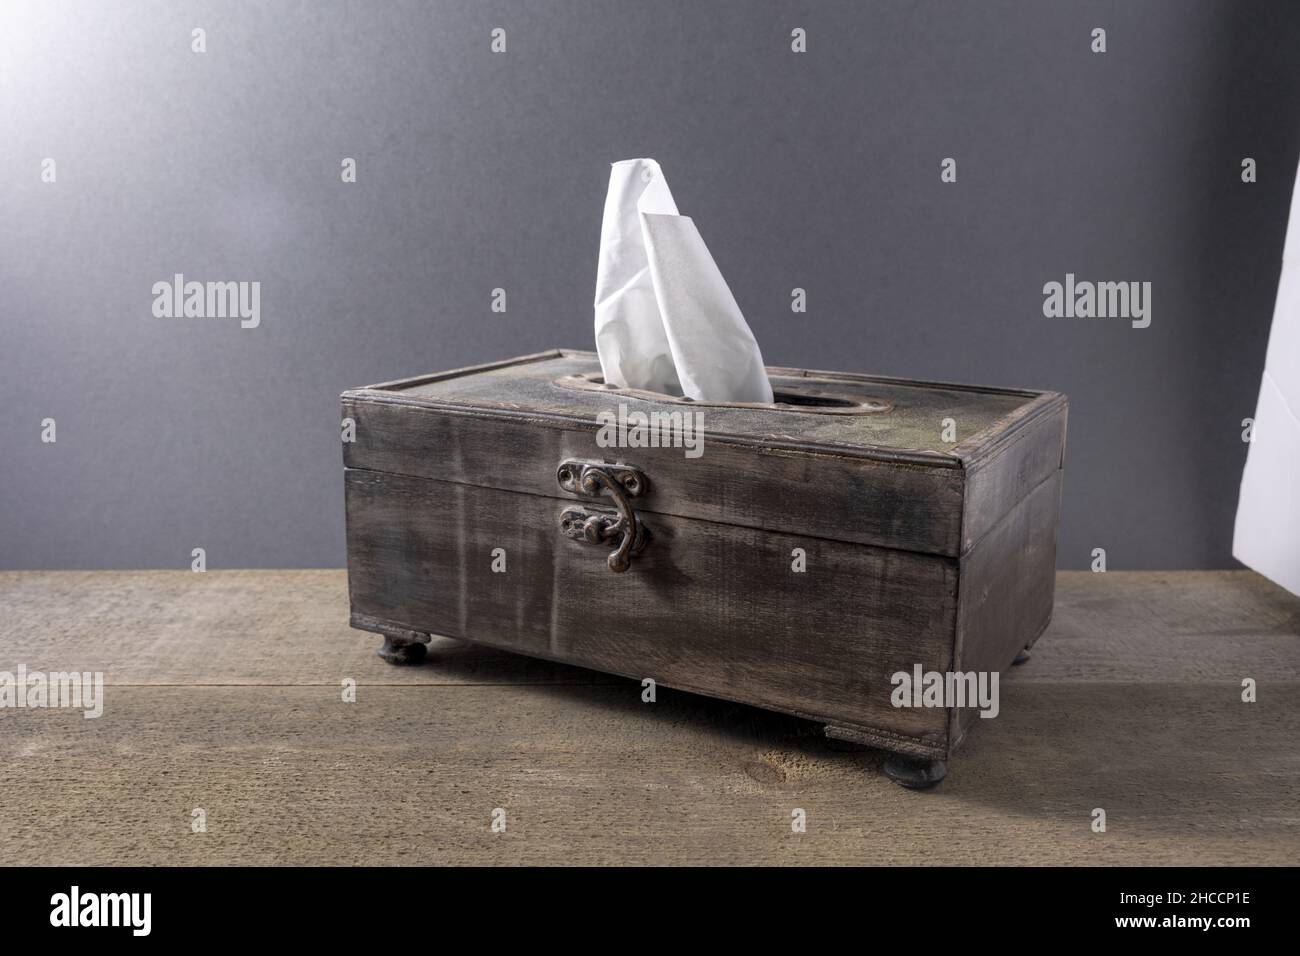 Closeup of a wooden box of tissues Stock Photo